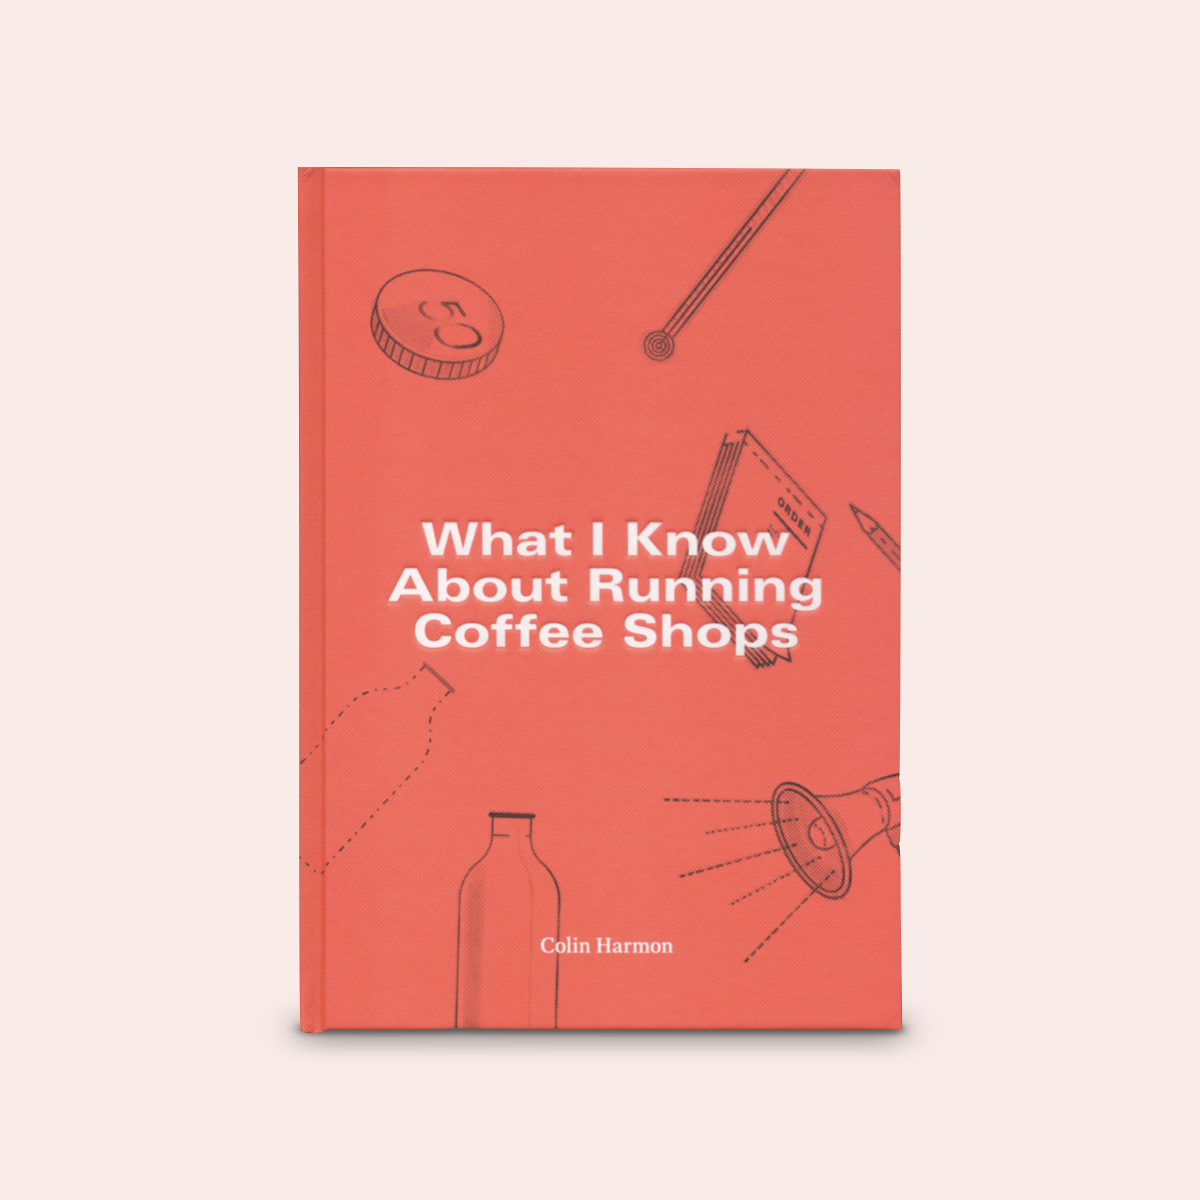 What I Know About Running Coffee Shops by Colin Harmon